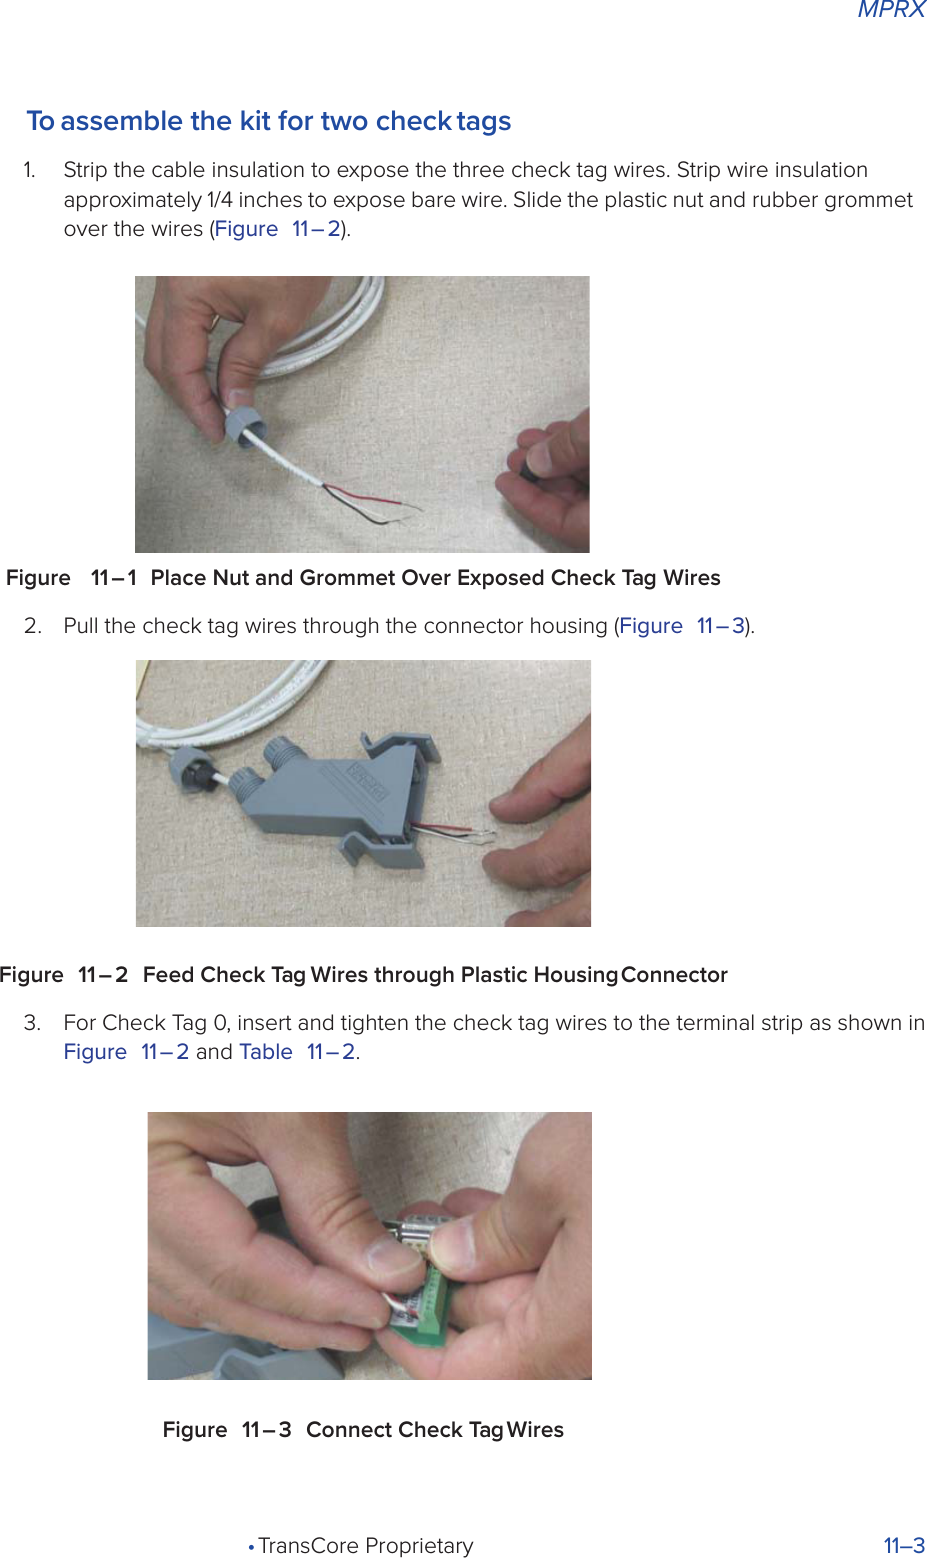 MPRX• TransCore Proprietary 11–3To assemble the kit for two check tags1.  Strip the cable insulation to expose the three check tag wires. Strip wire insulation approximately 1/4 inches to expose bare wire. Slide the plastic nut and rubber grommet over the wires (Figure 11 – 2).Figure   11 – 1  Place Nut and Grommet Over Exposed Check Tag Wires2.  Pull the check tag wires through the connector housing (Figure 11 – 3).Figure 11 – 2 Feed Check Tag Wires through Plastic Housing Connector3.  For Check Tag 0, insert and tighten the check tag wires to the terminal strip as shown in Figure 11 – 2 and Table 11 – 2.Figure 11 – 3 Connect Check Tag Wires